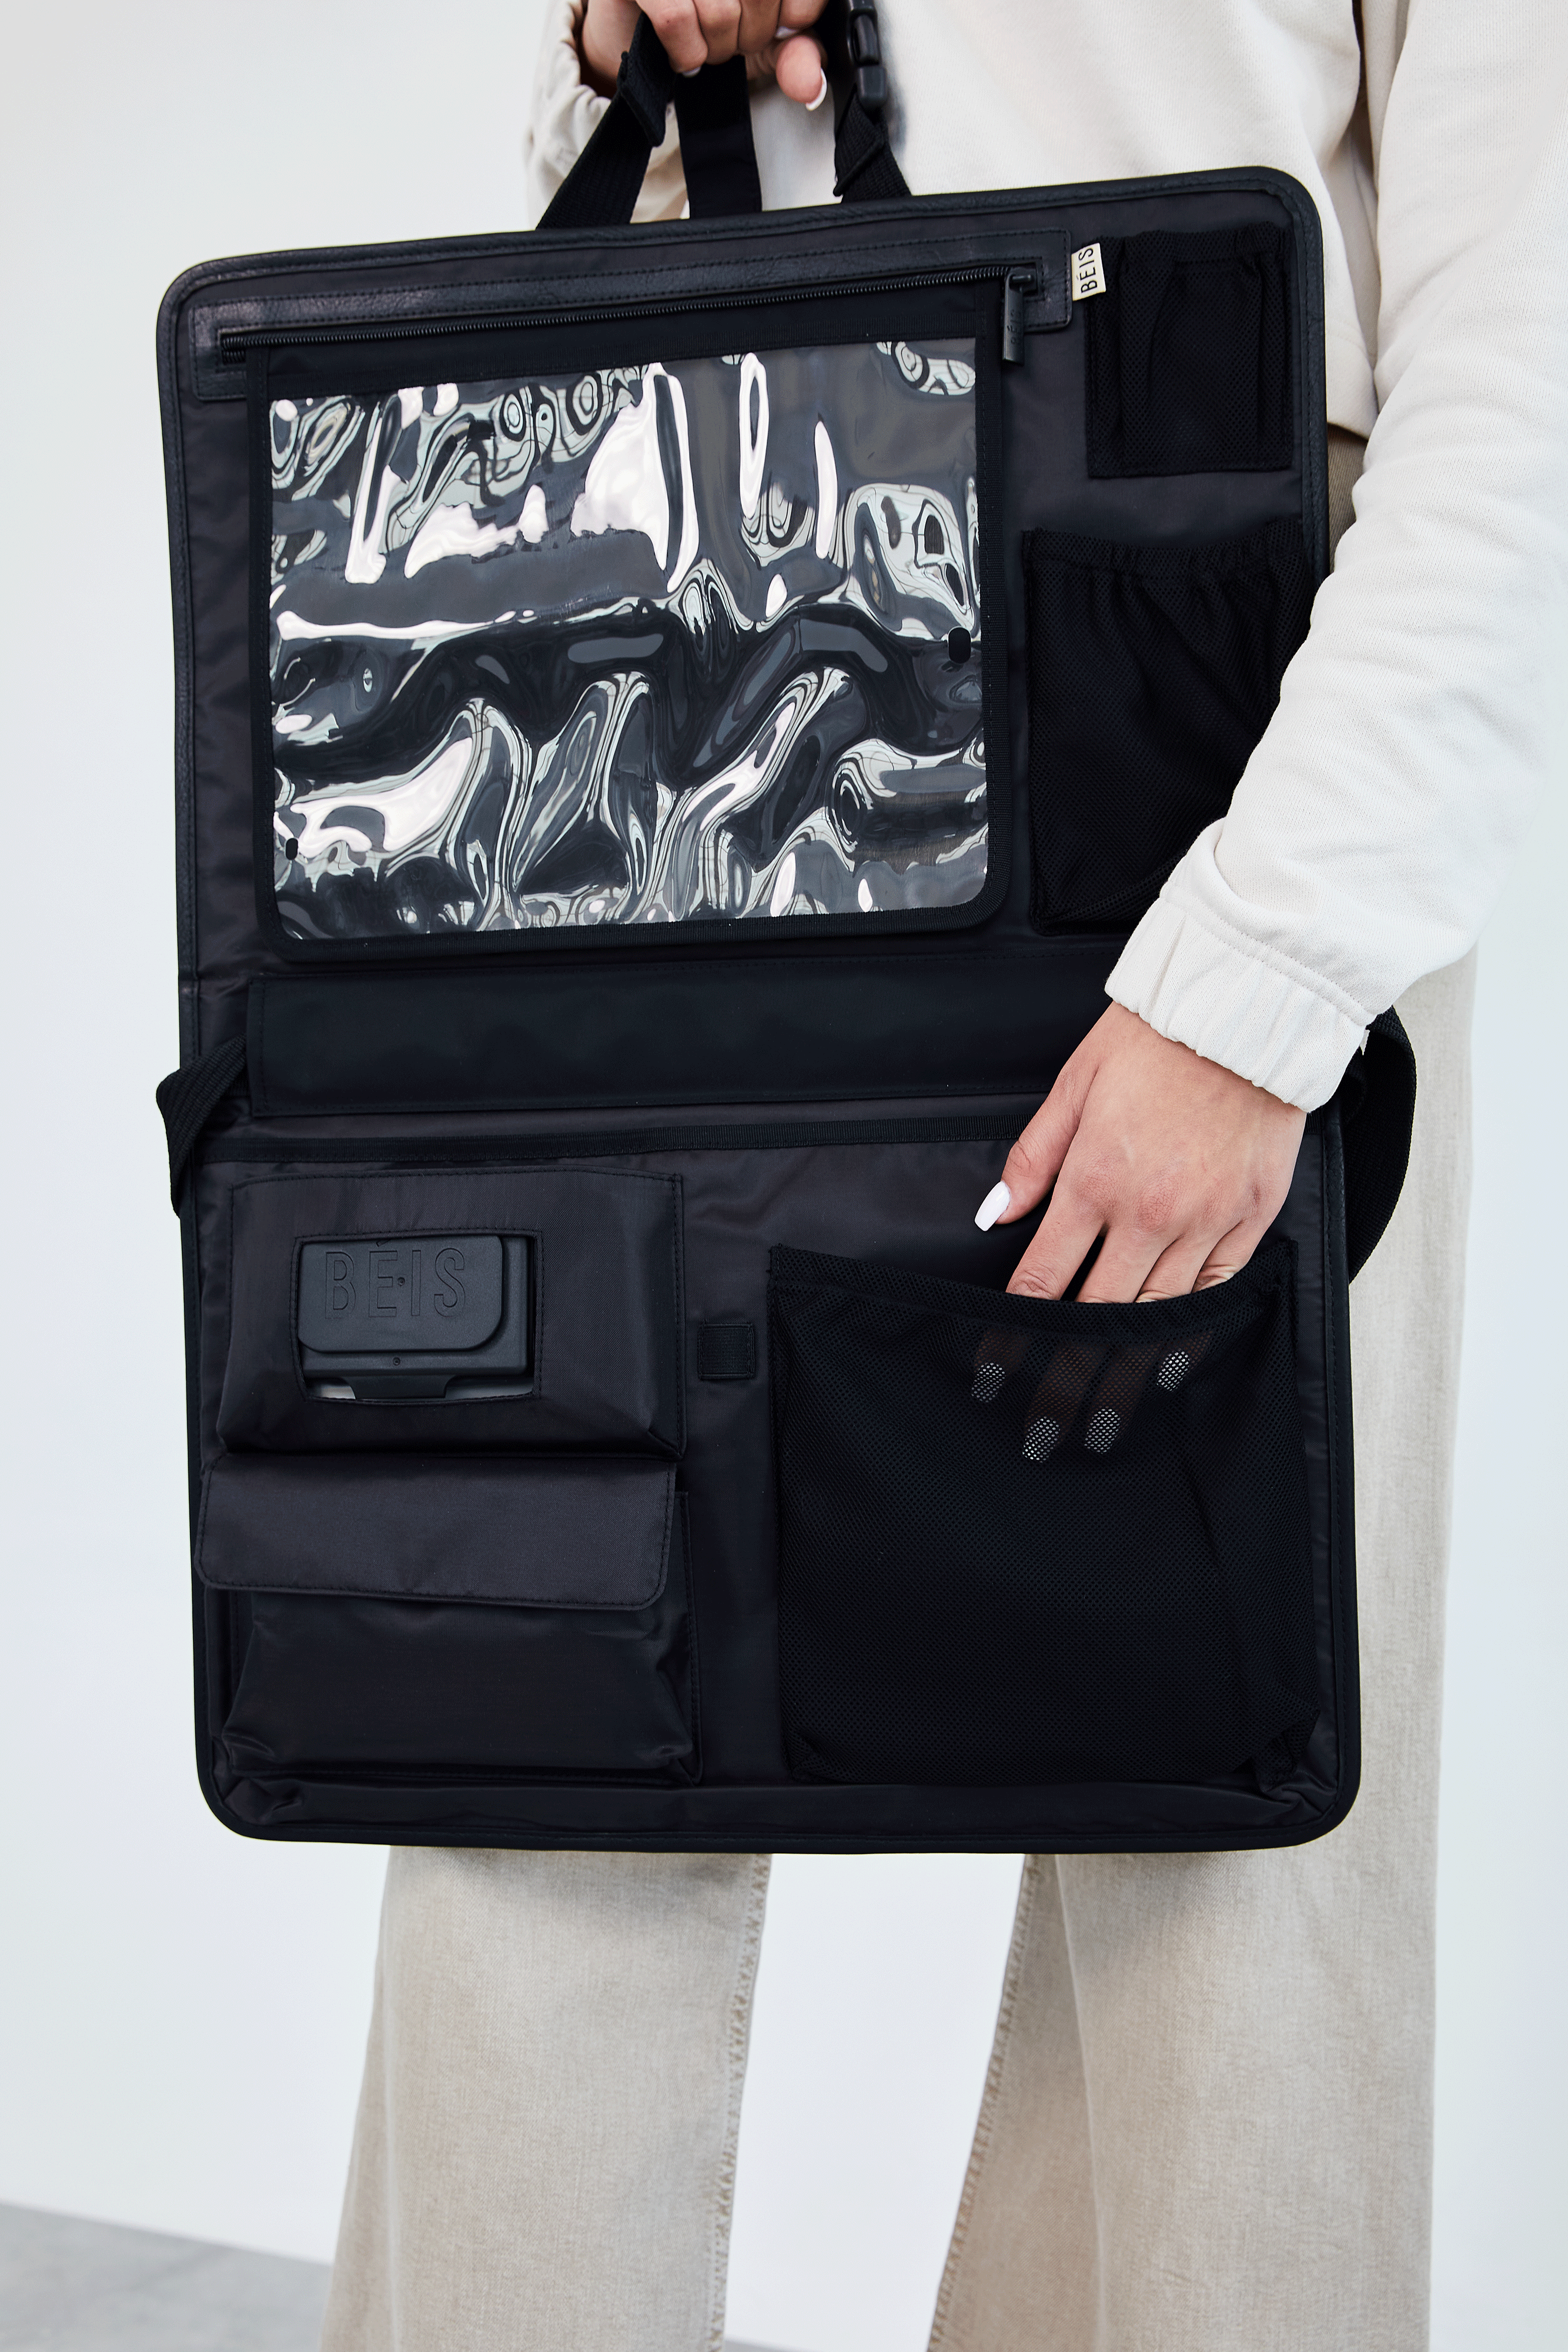 The Lunch Bag in Black